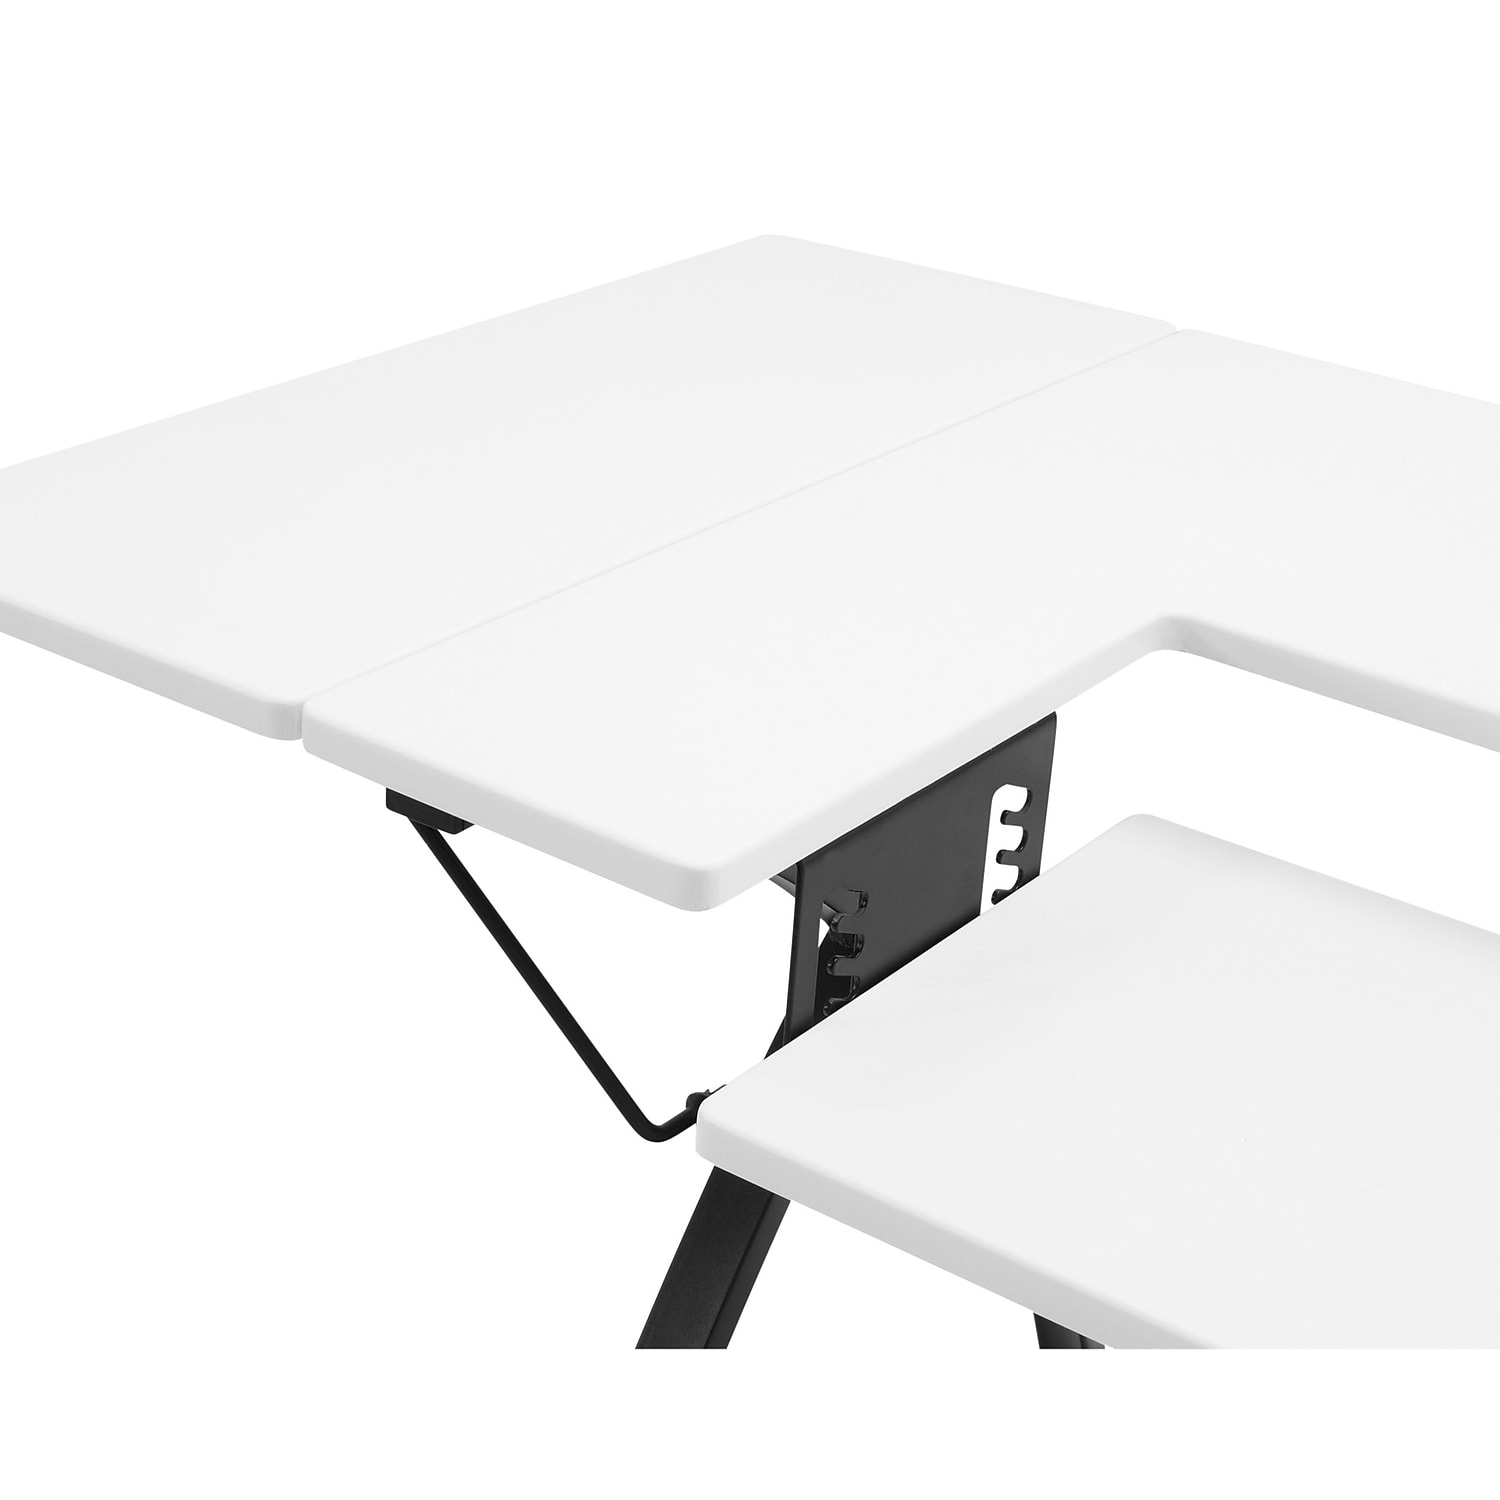 Sew Ready 13332 Comet Modern Sewing Table in Black / White - image 2 of 7